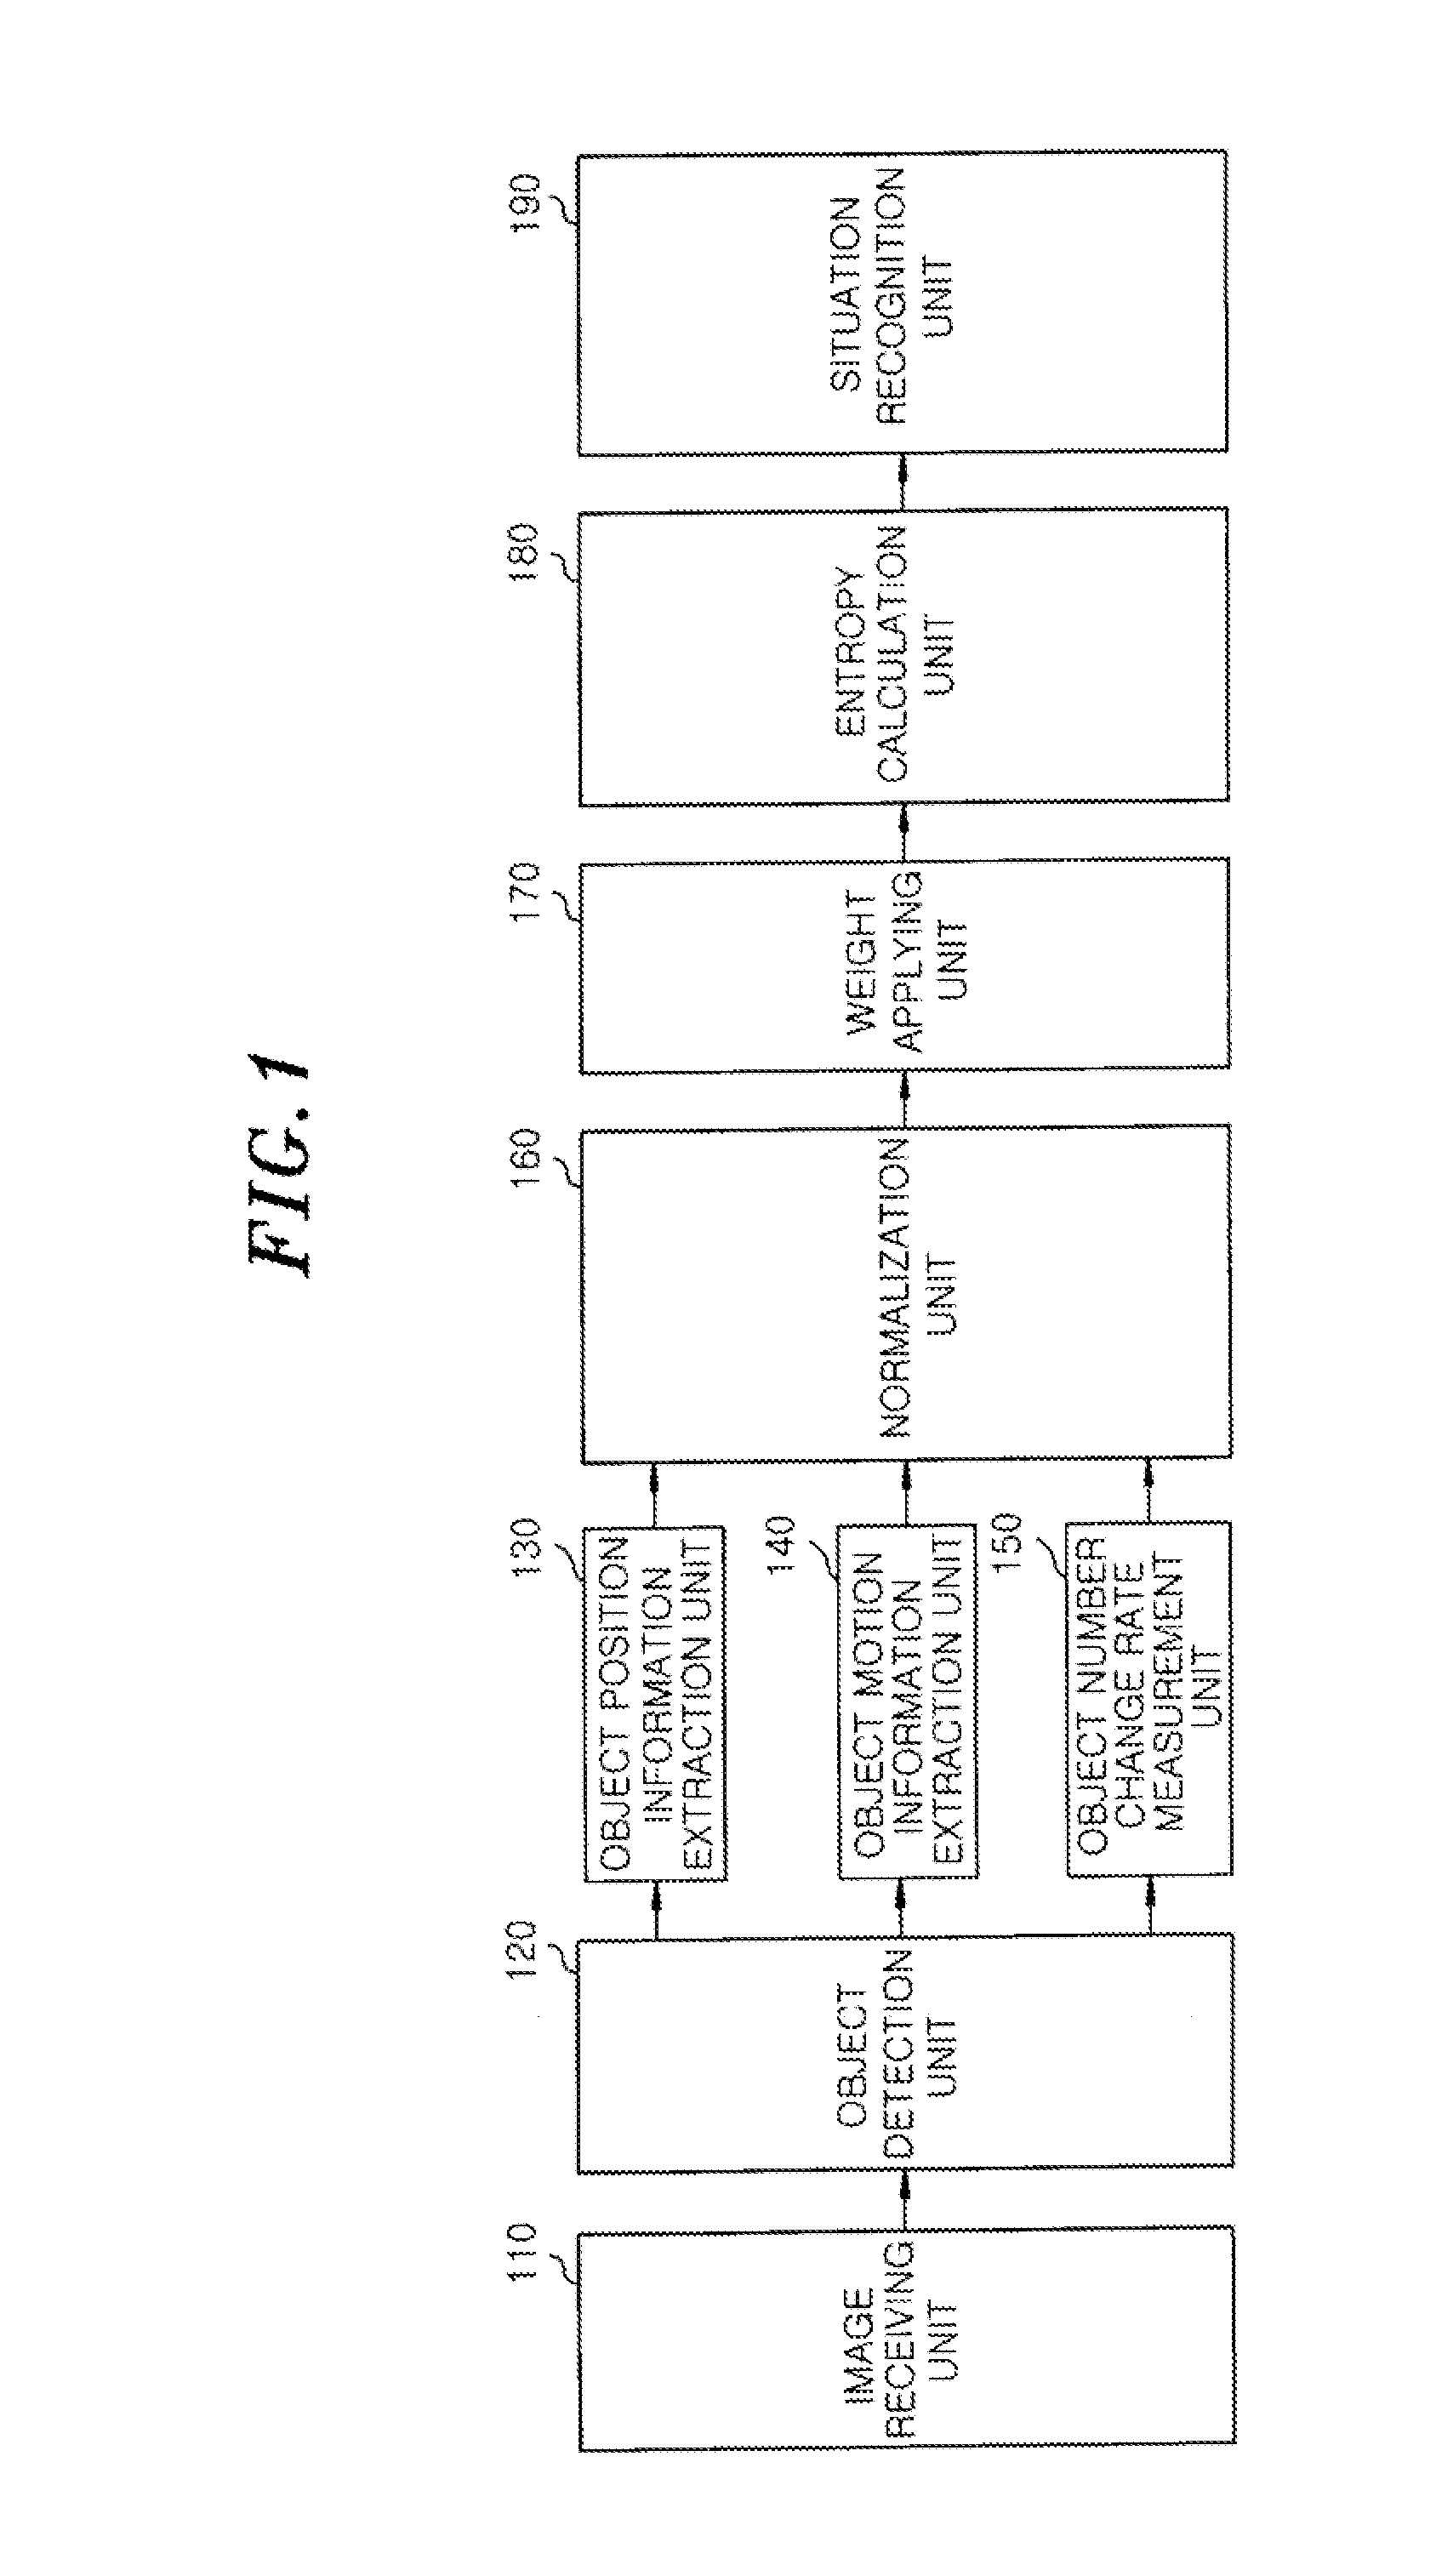 Situation recognition apparatus and method using object energy information